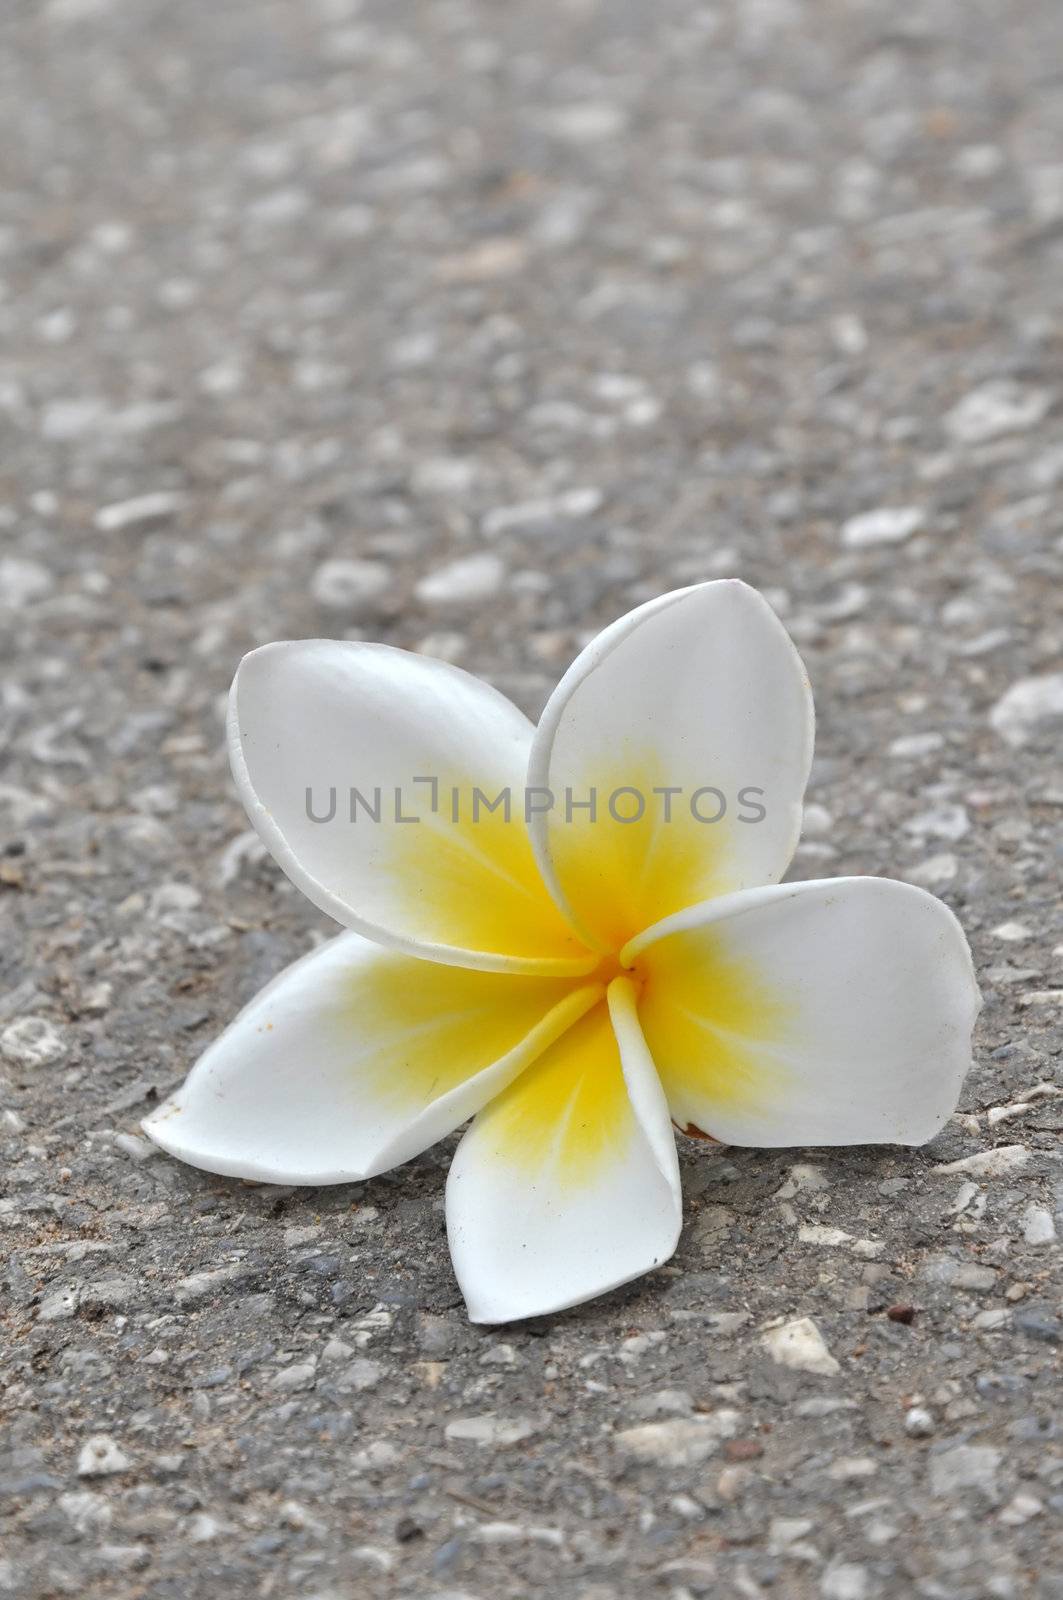 Plumeria (common name Frangipani) is a genus of flowering plants of the family which includes Dogbane: the Apocynaceae.
